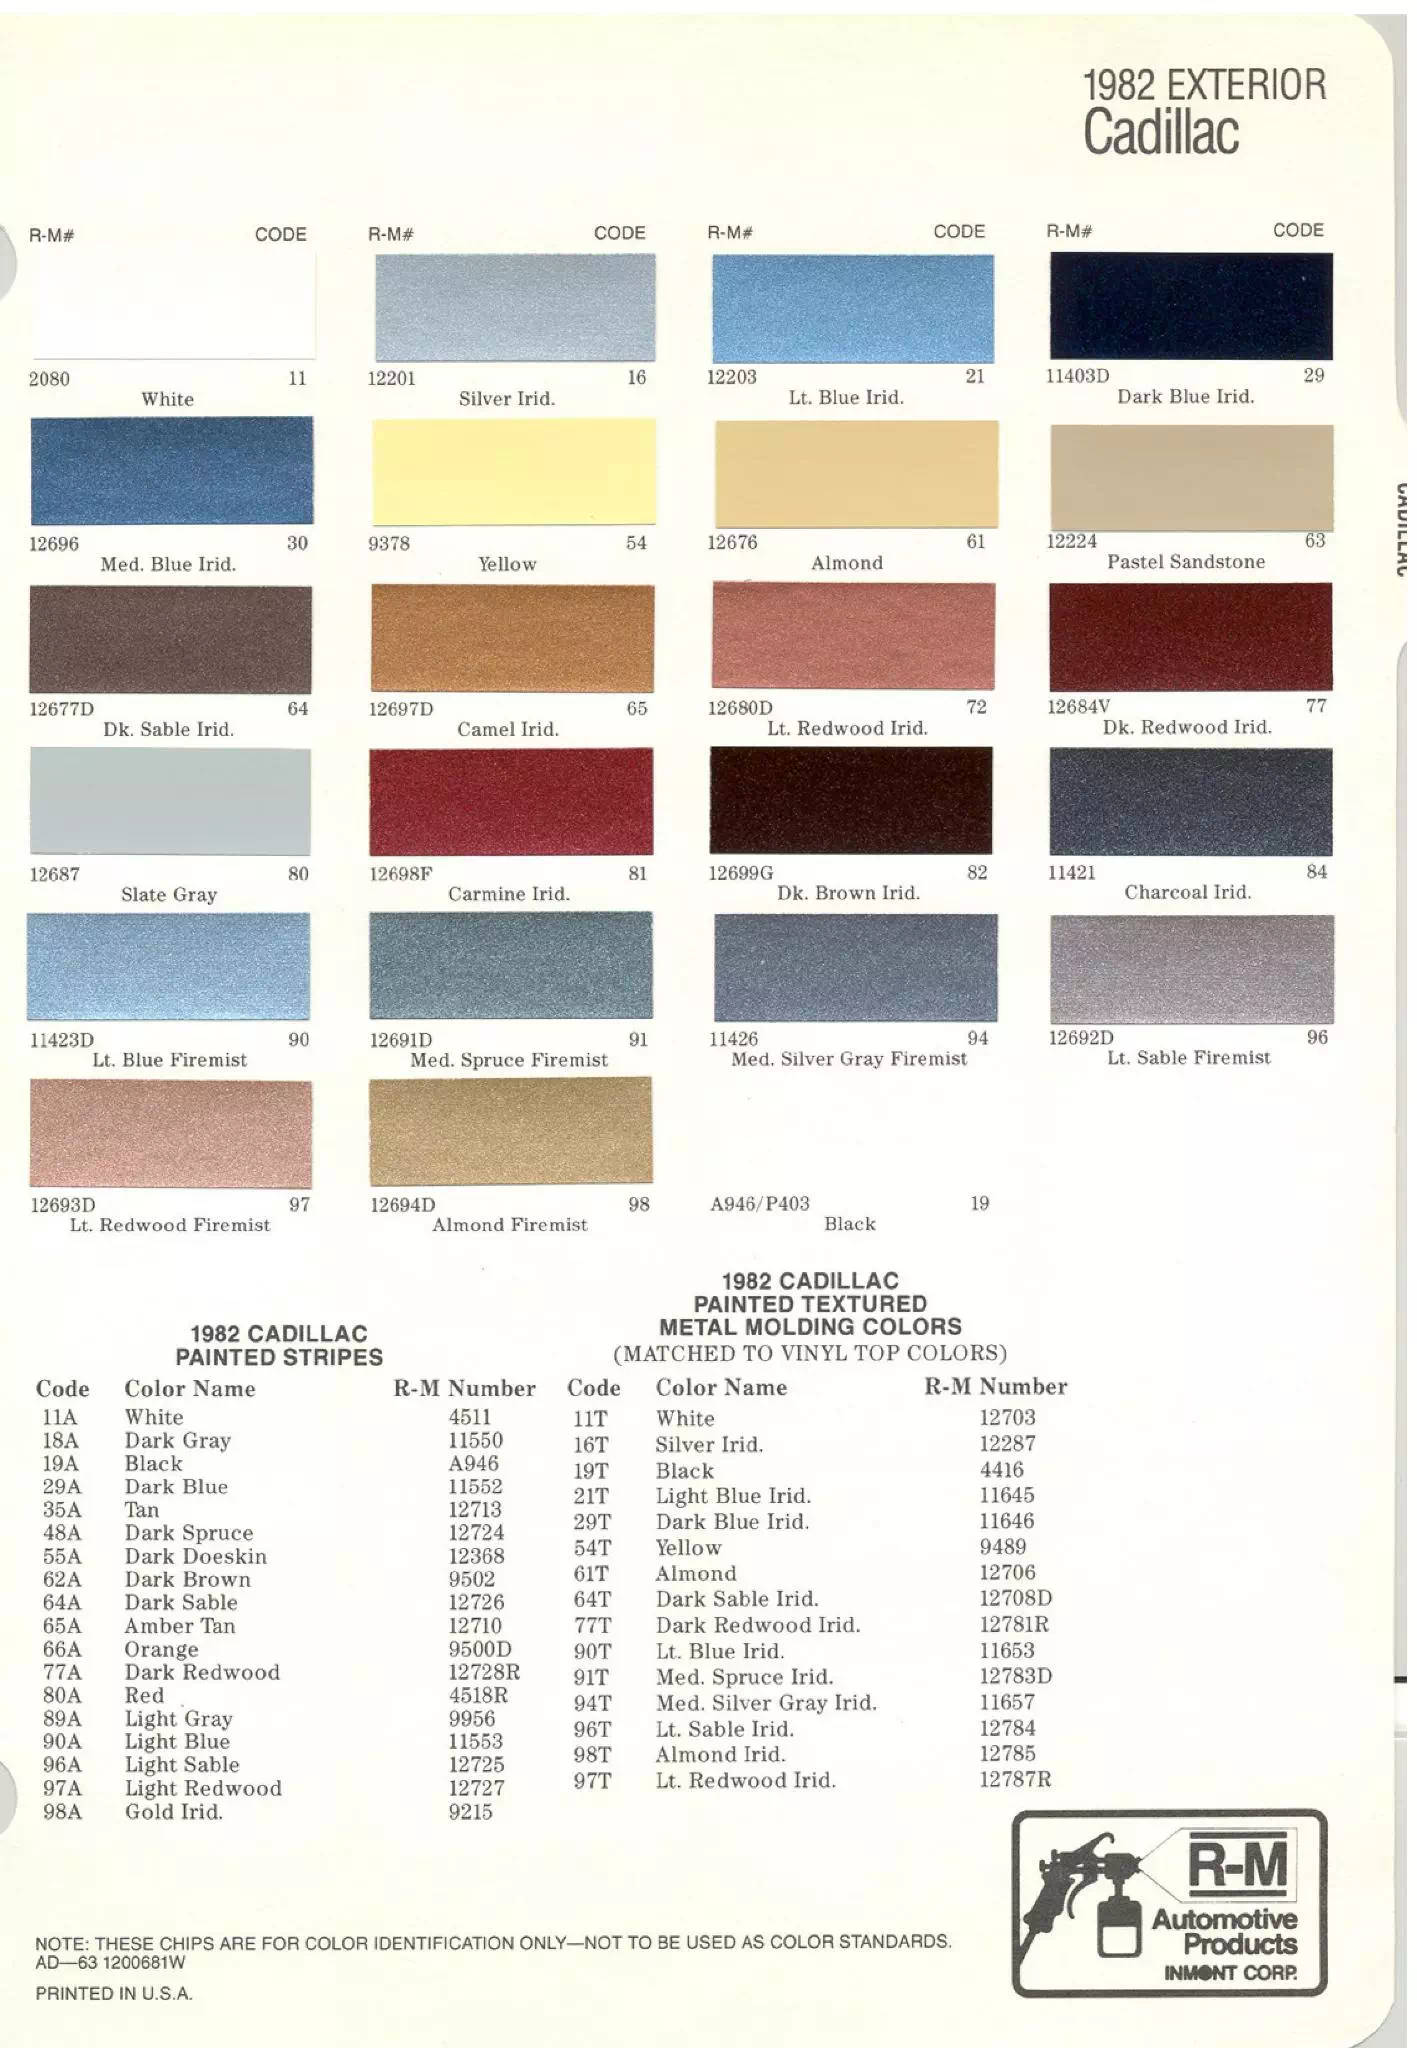 General Motors oem paint swatches, color codes and color names for 1982 vehicles.